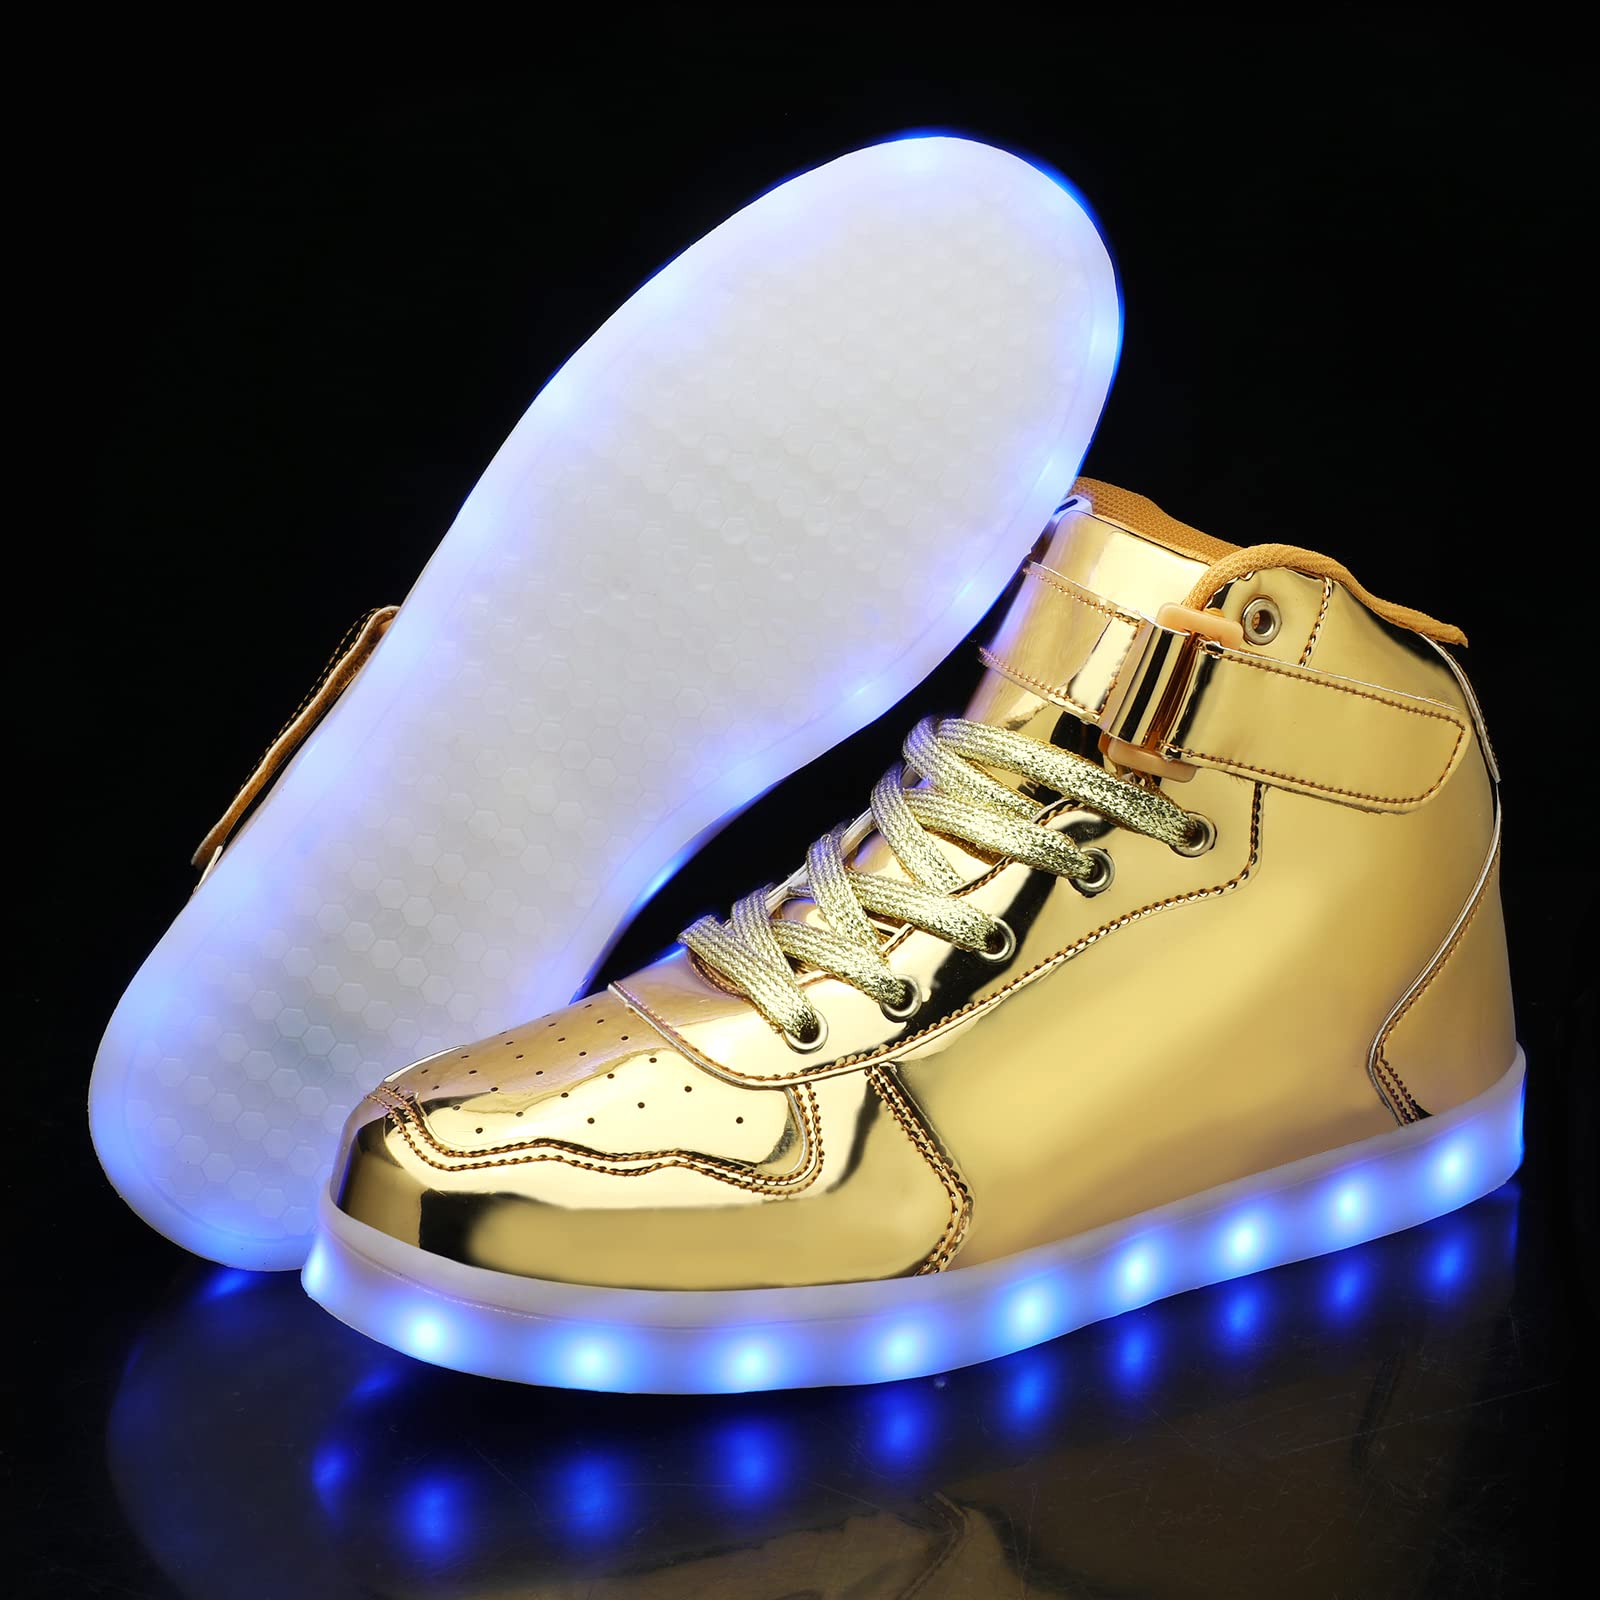 Wooowyet LED Light Up Shoes Kids High Top LED Sneakers for Boys Girls Toddler Halloween Christmas